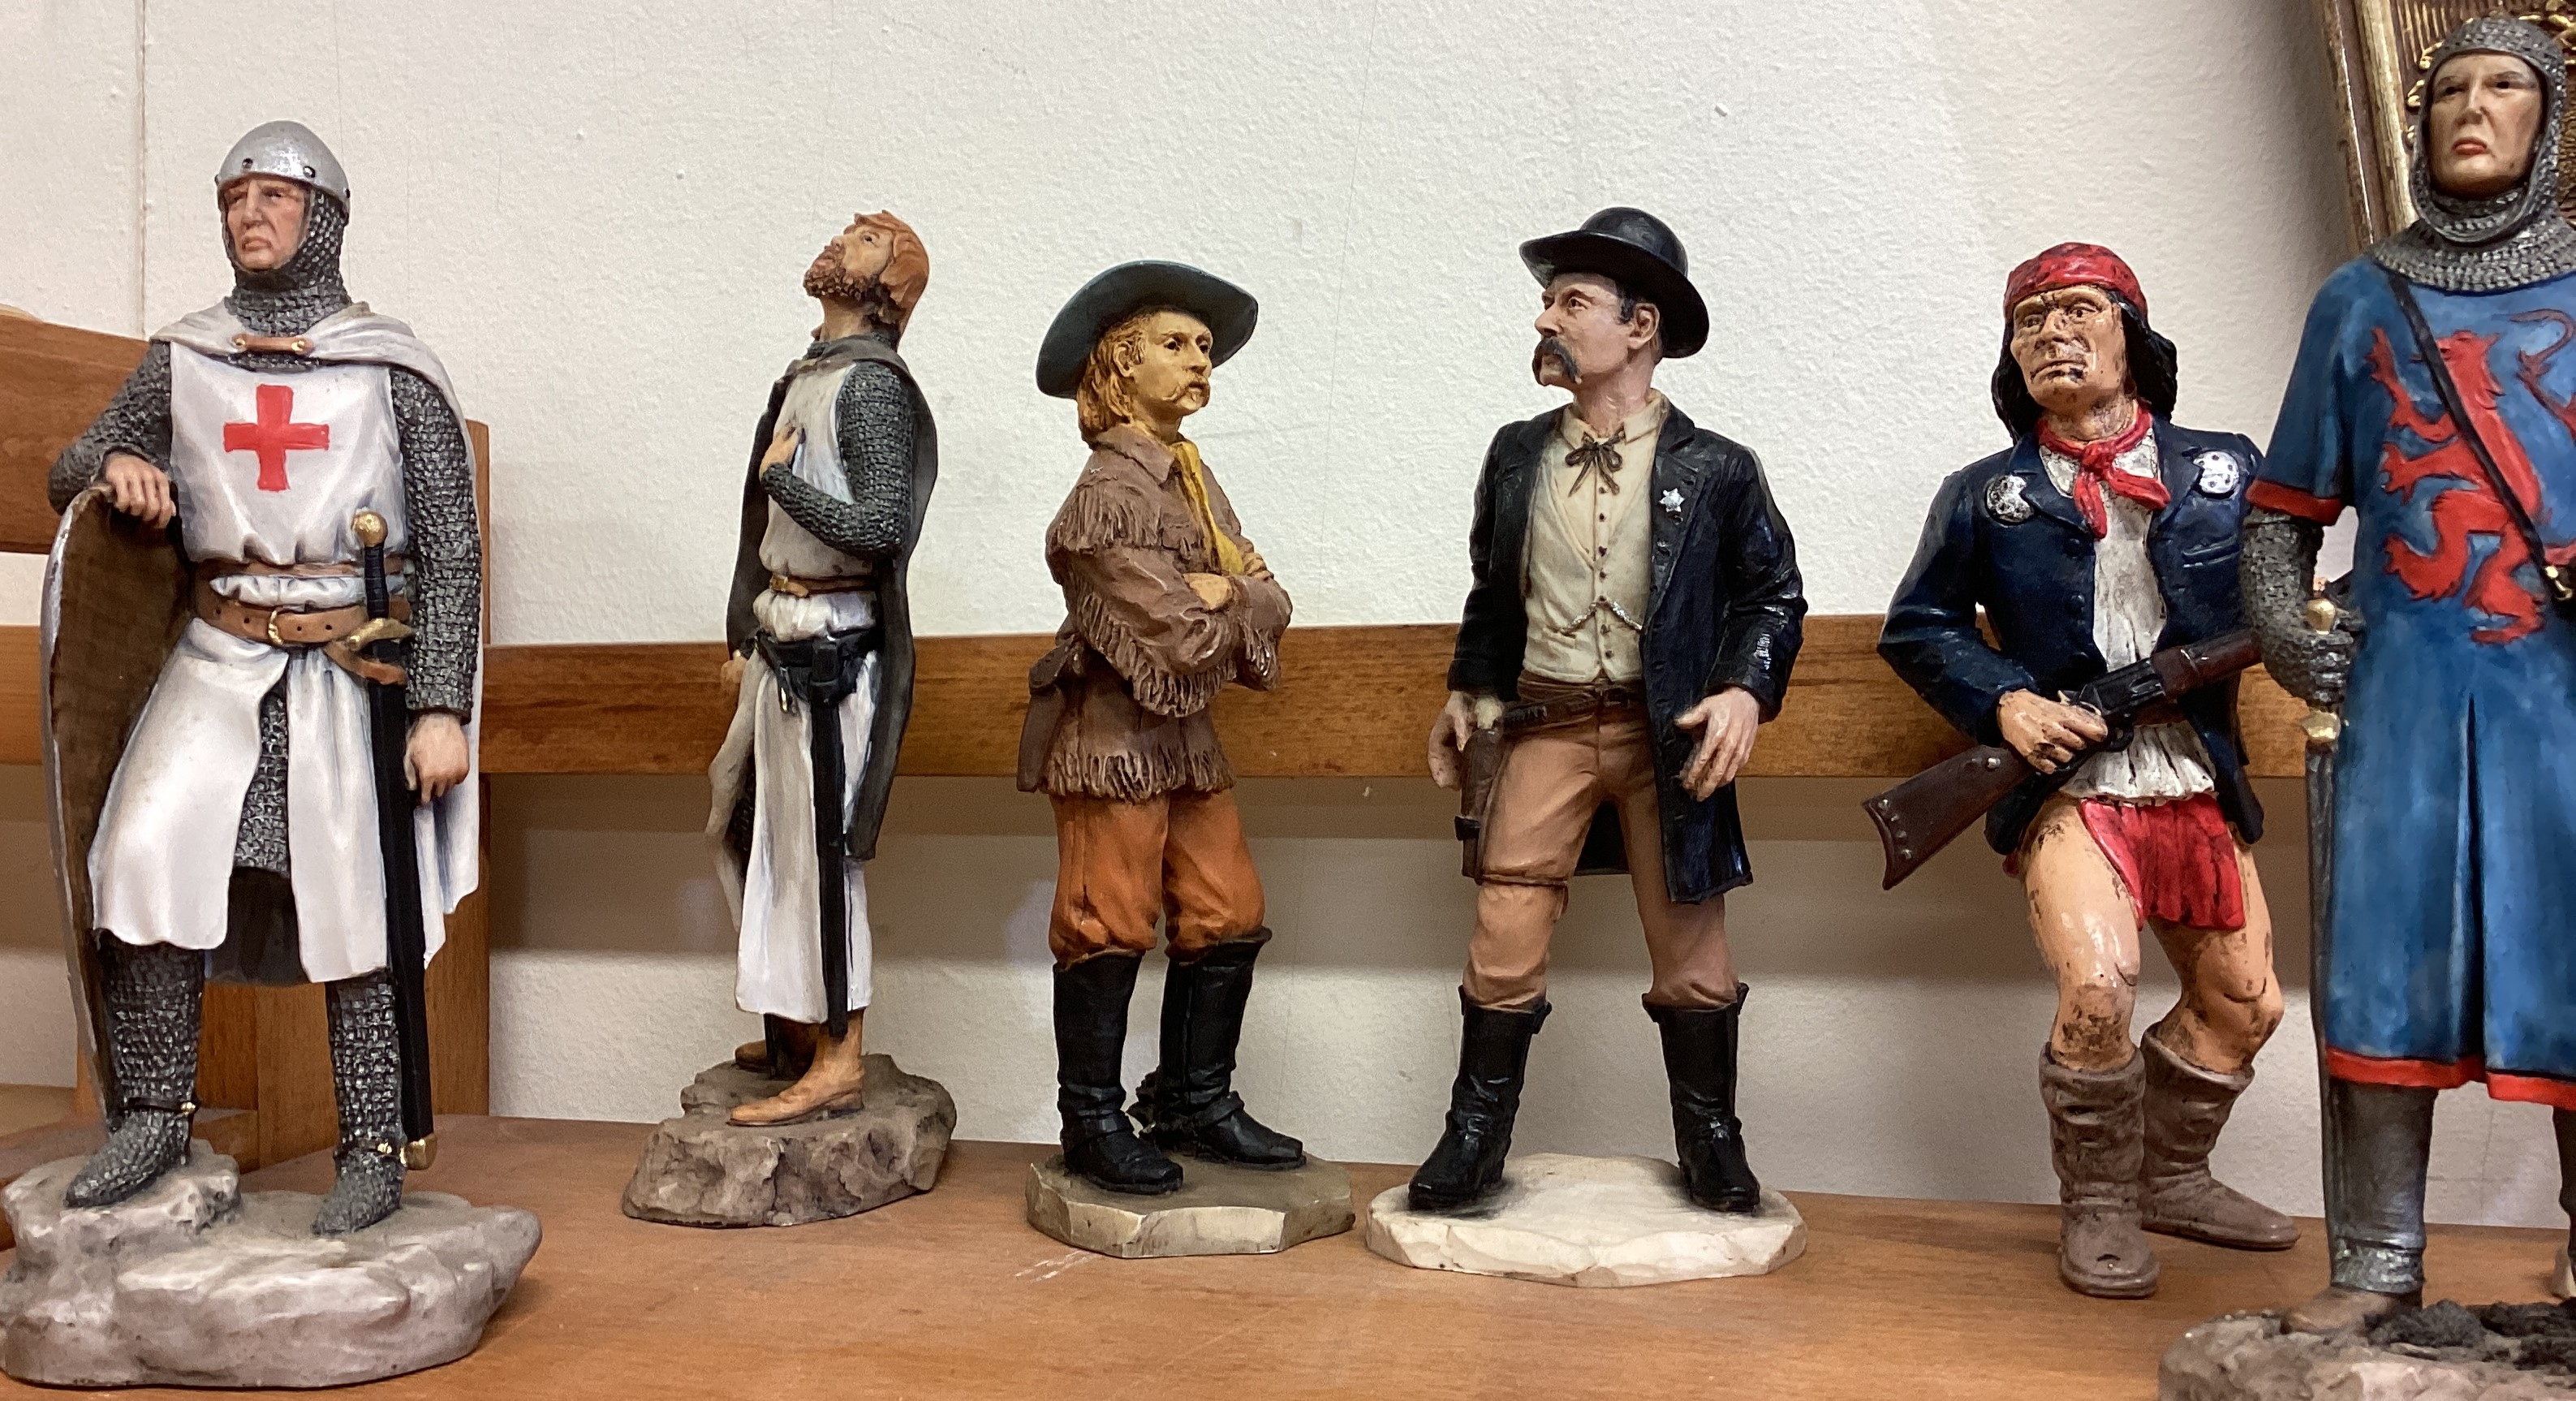 A set of resin model figures. - Image 2 of 3